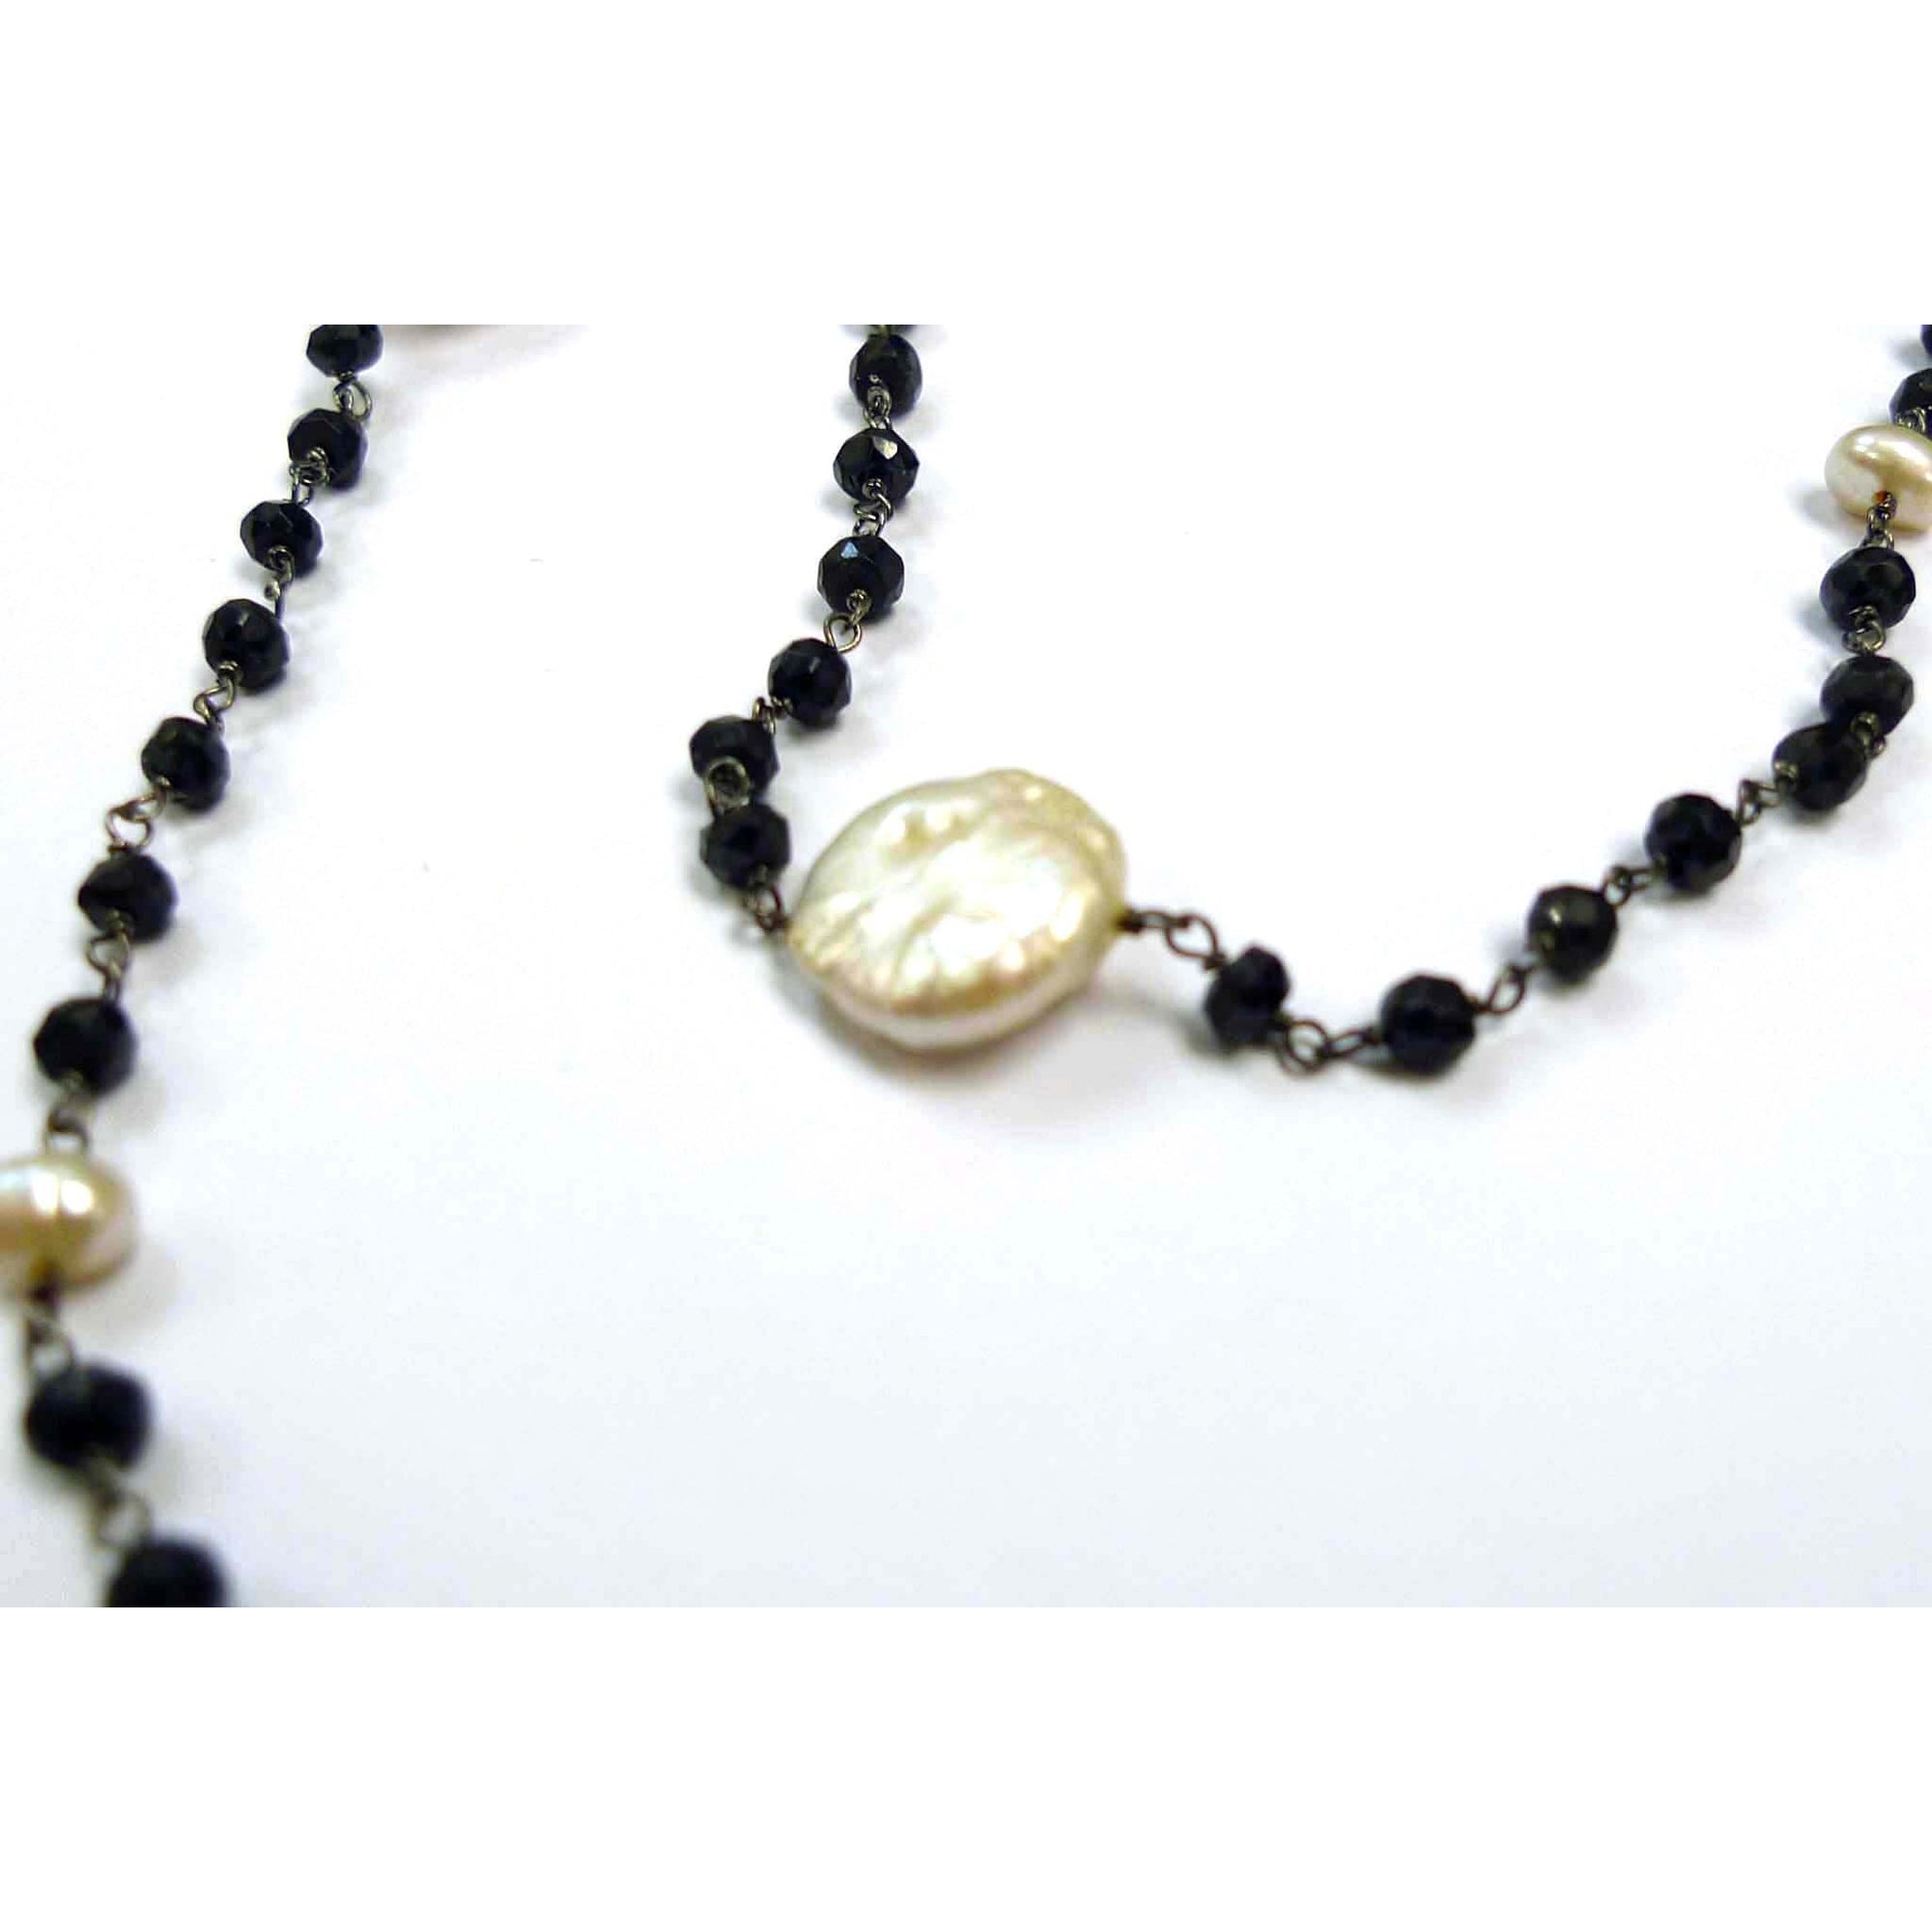 Black Spinel Knotting Chain Necklace